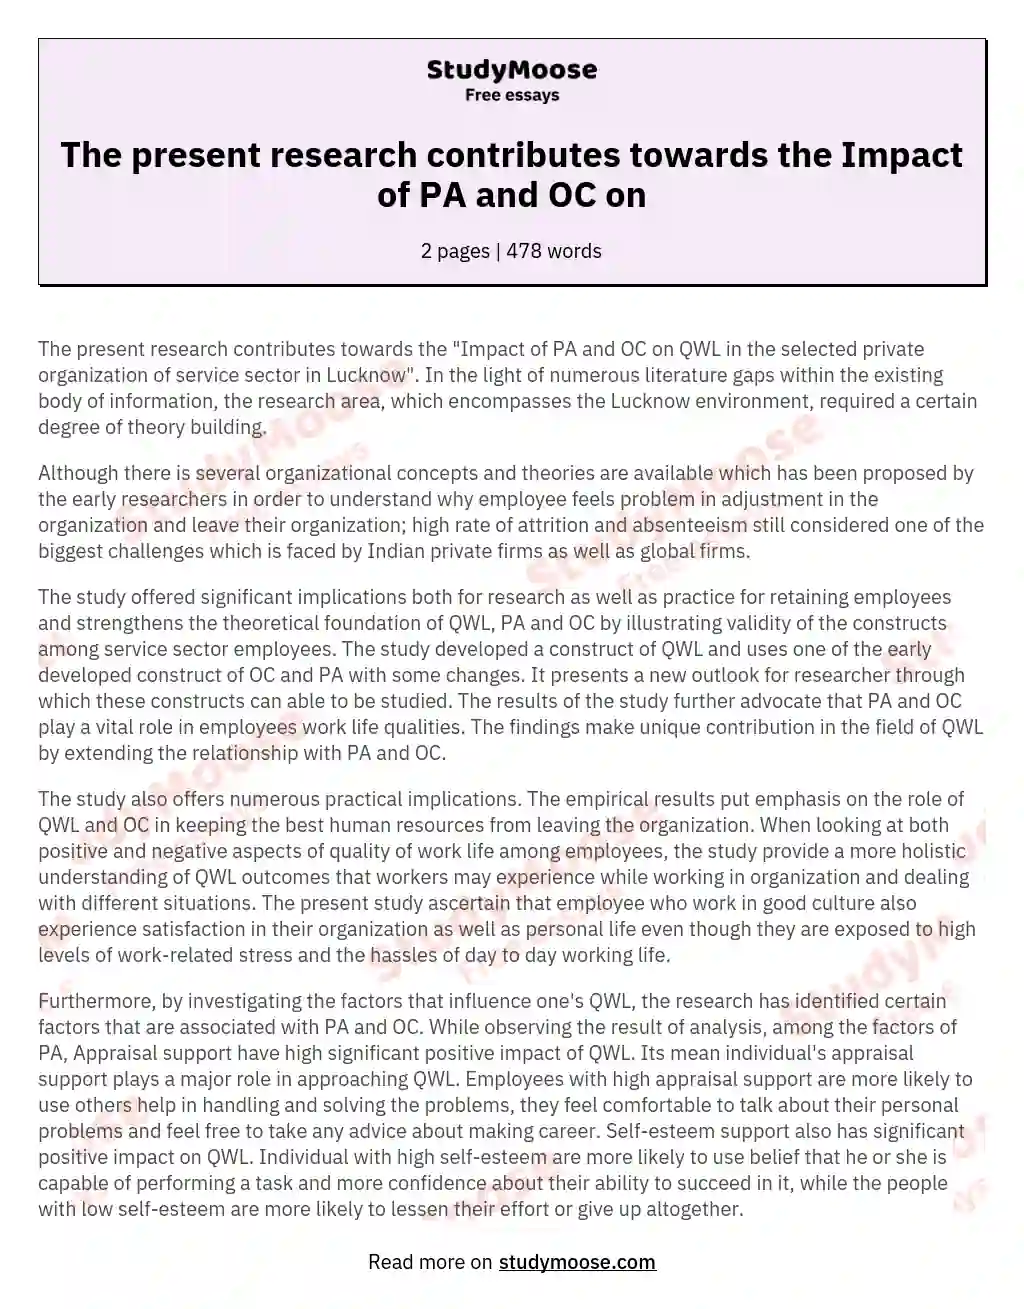 The present research contributes towards the Impact of PA and OC on essay